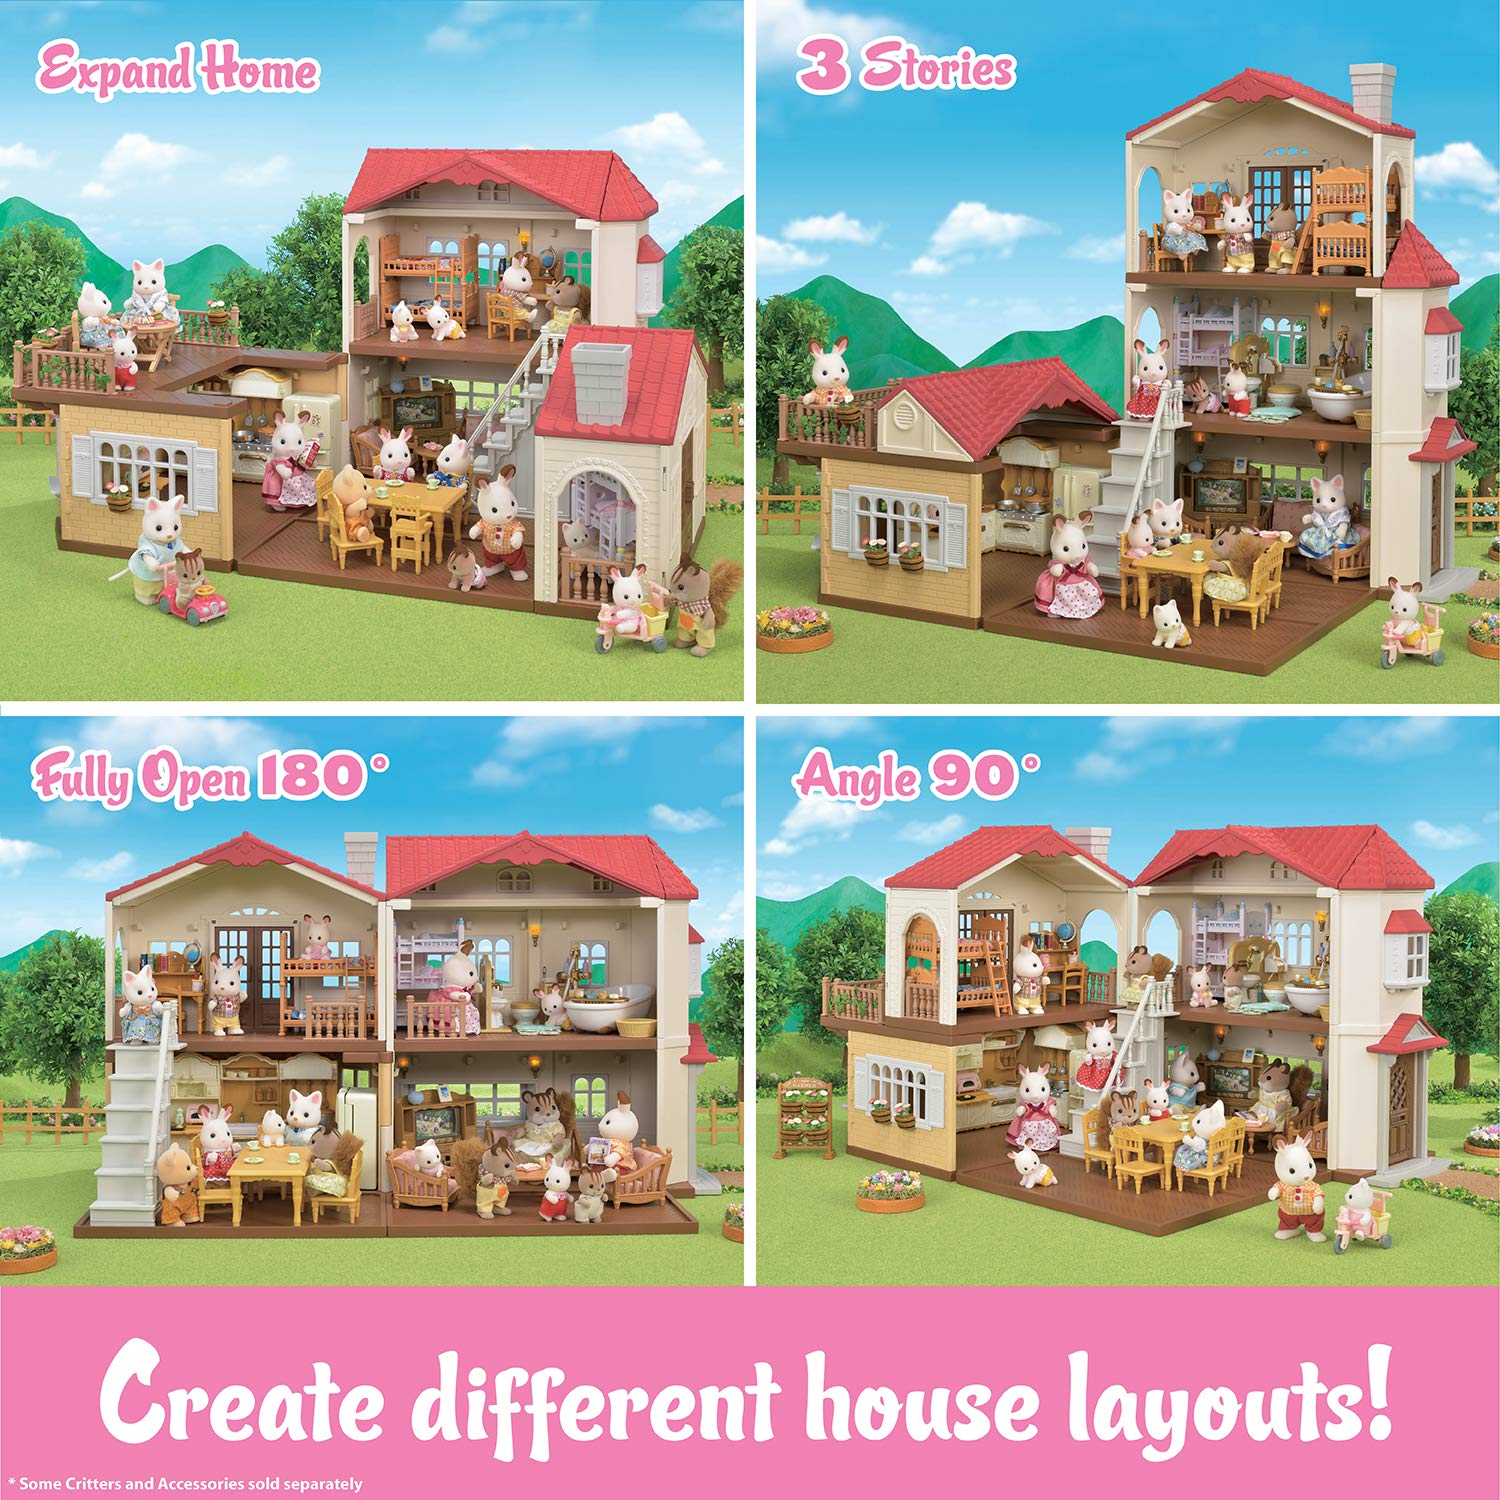 Calico Critters Red Roof Country Home Gift set